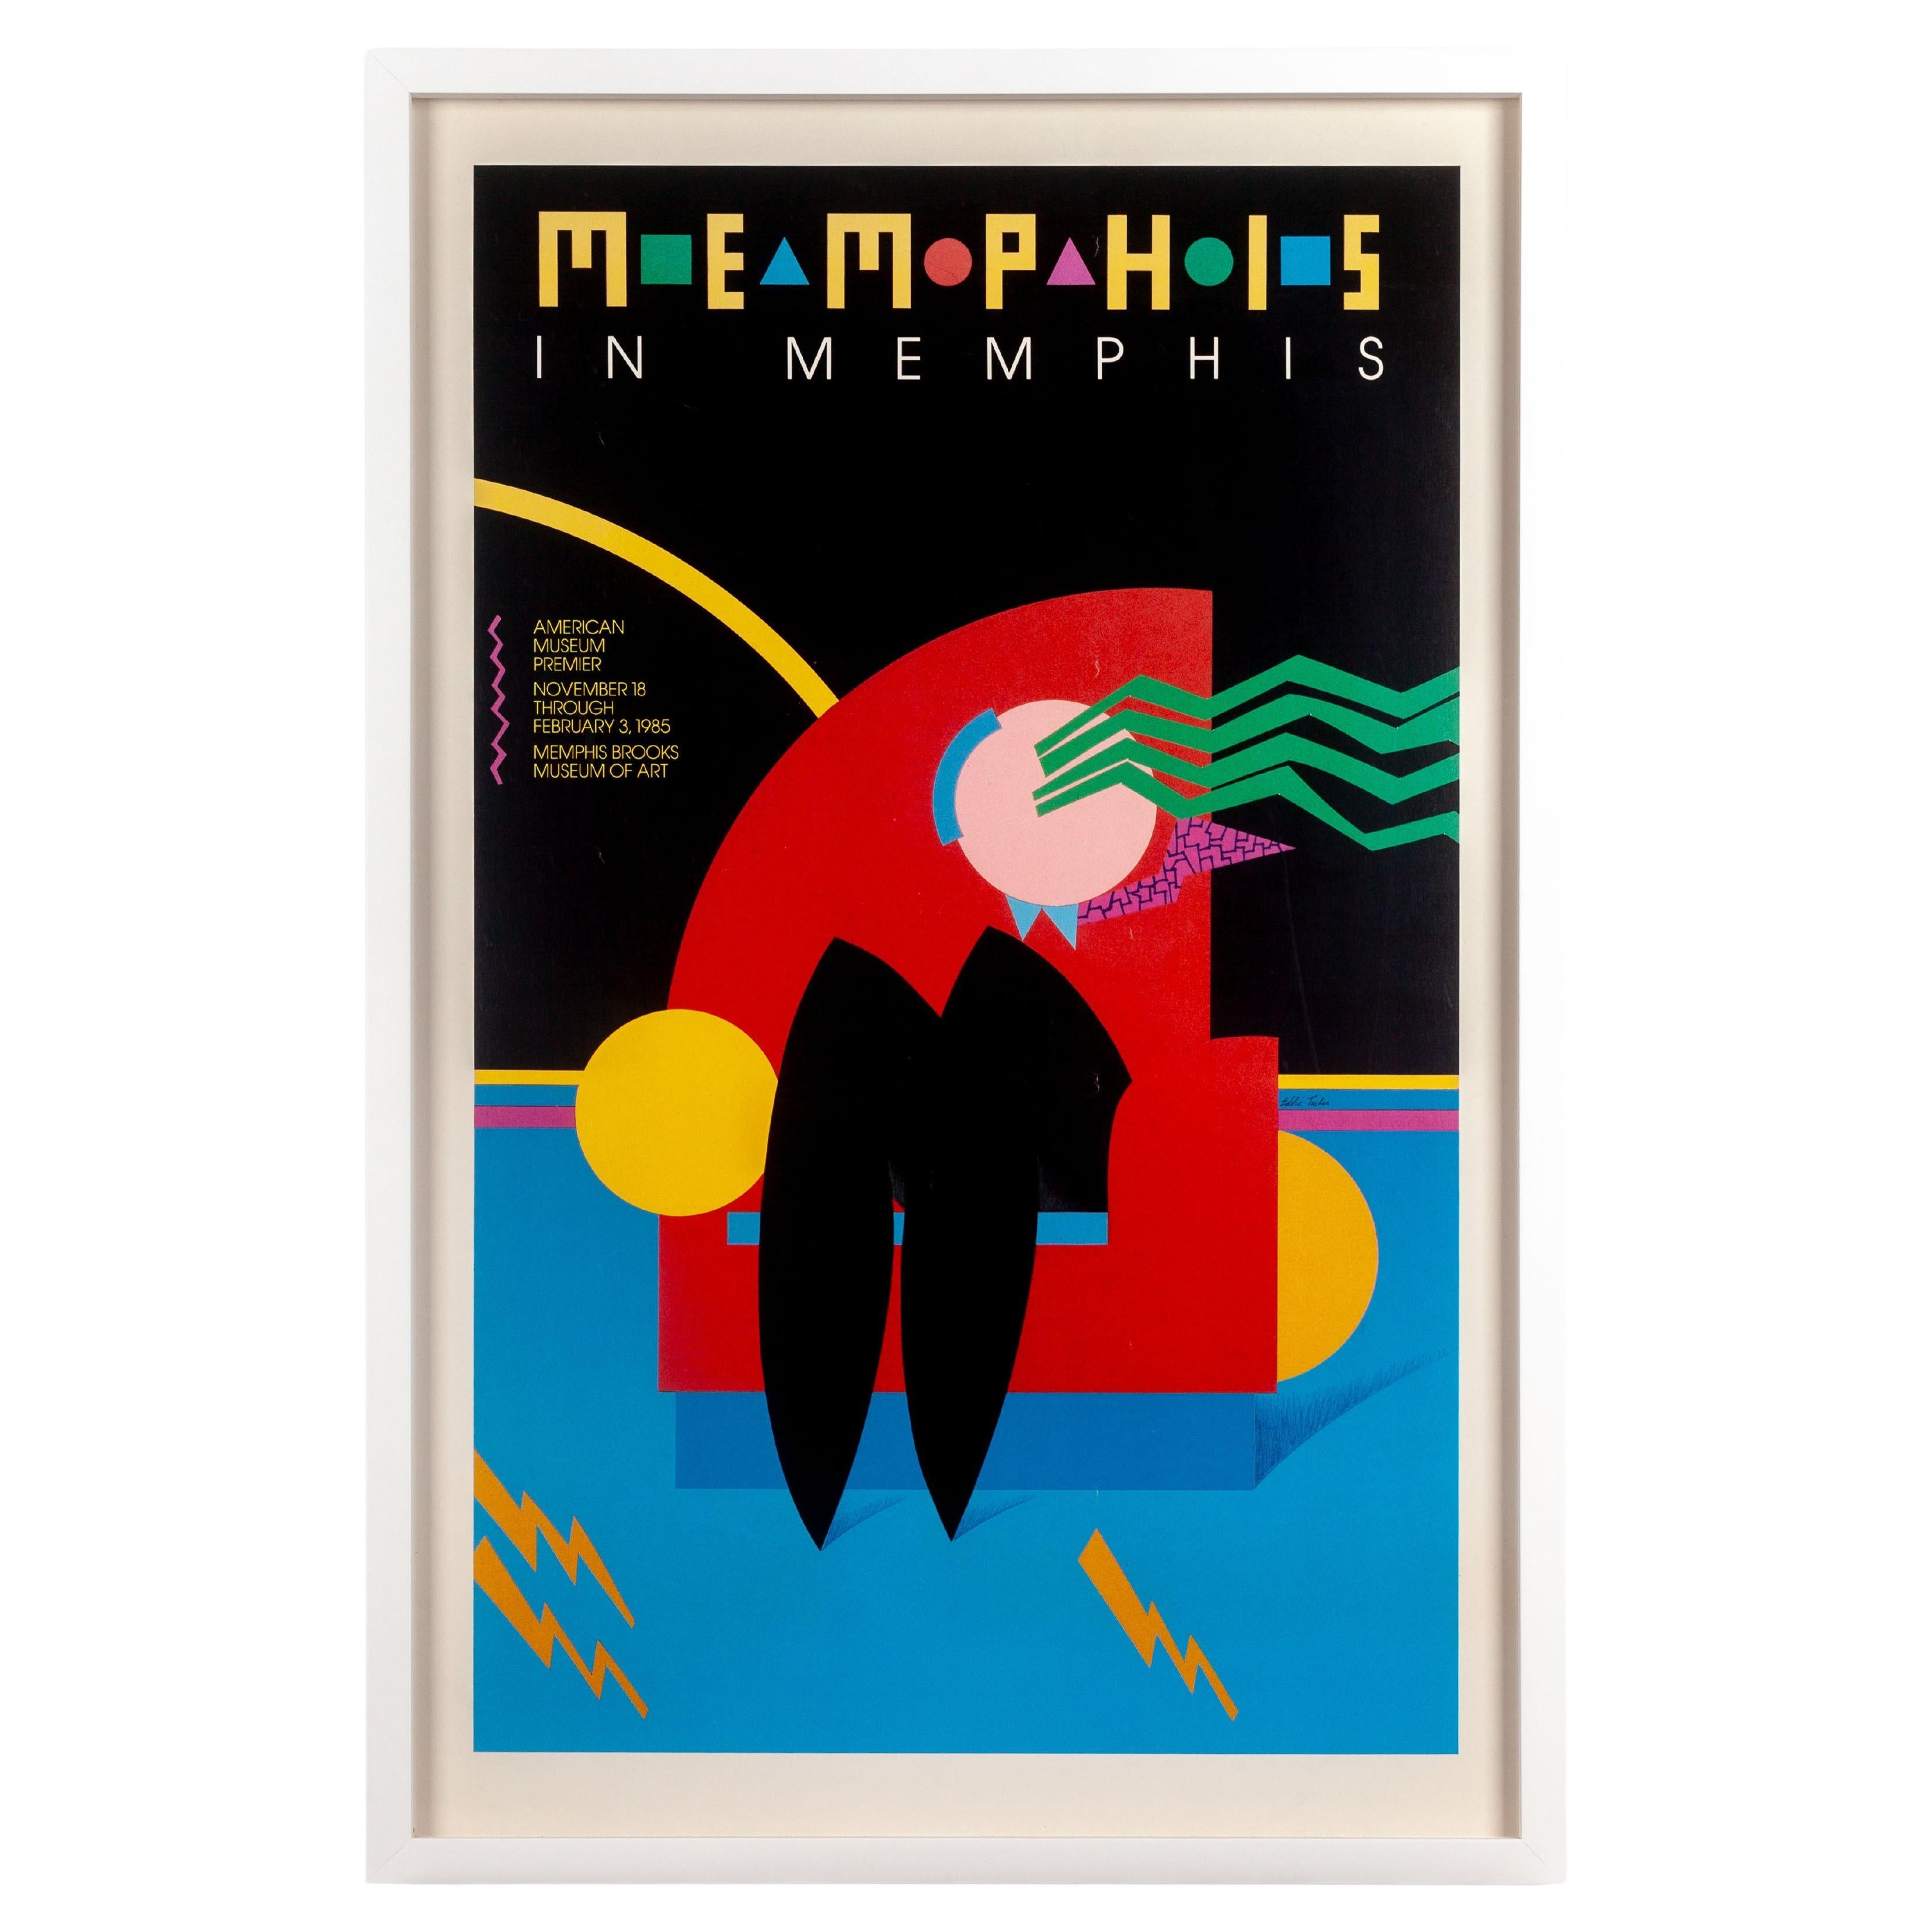 Memphis In Memphis, 1985 Exhibition Poster Framed For Sale